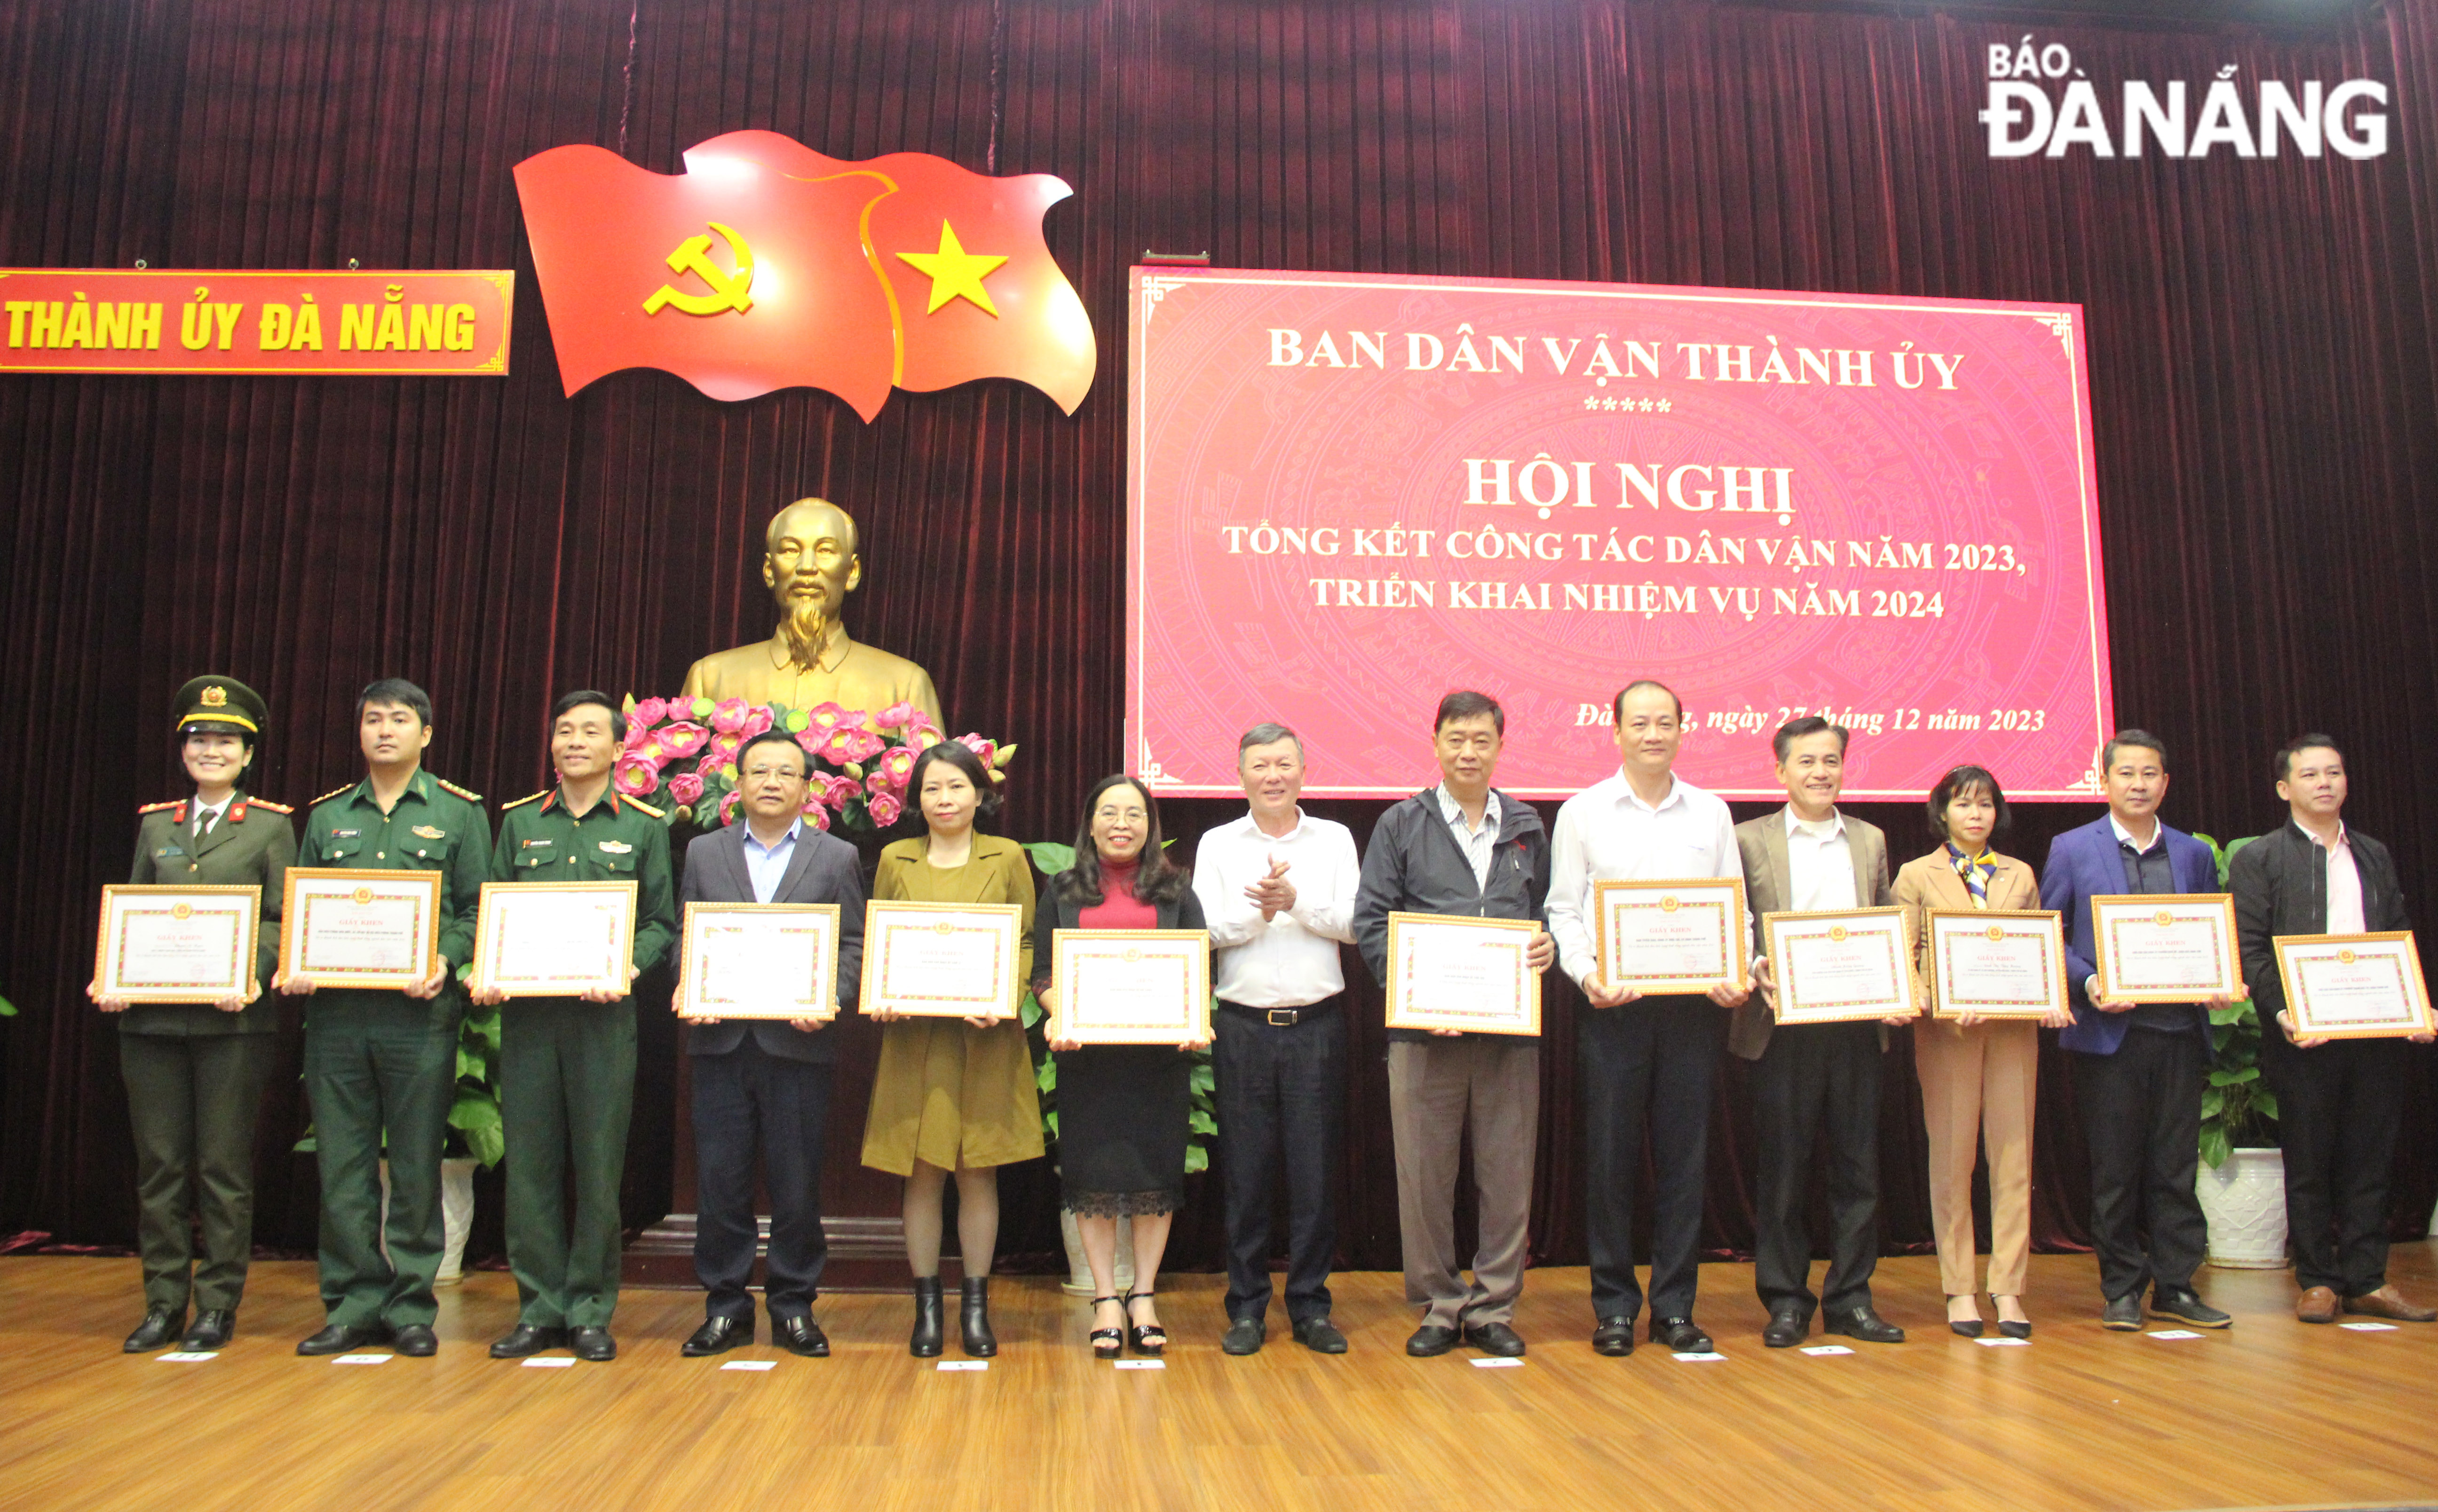 Head of the Da Nang Party Committee's Mass Mobilisation Board Le Van Trung (middle) awarding Certificates of Merit to outstanding groups and individuals in the mass mobilisationsector in 2023. Photo: X.H